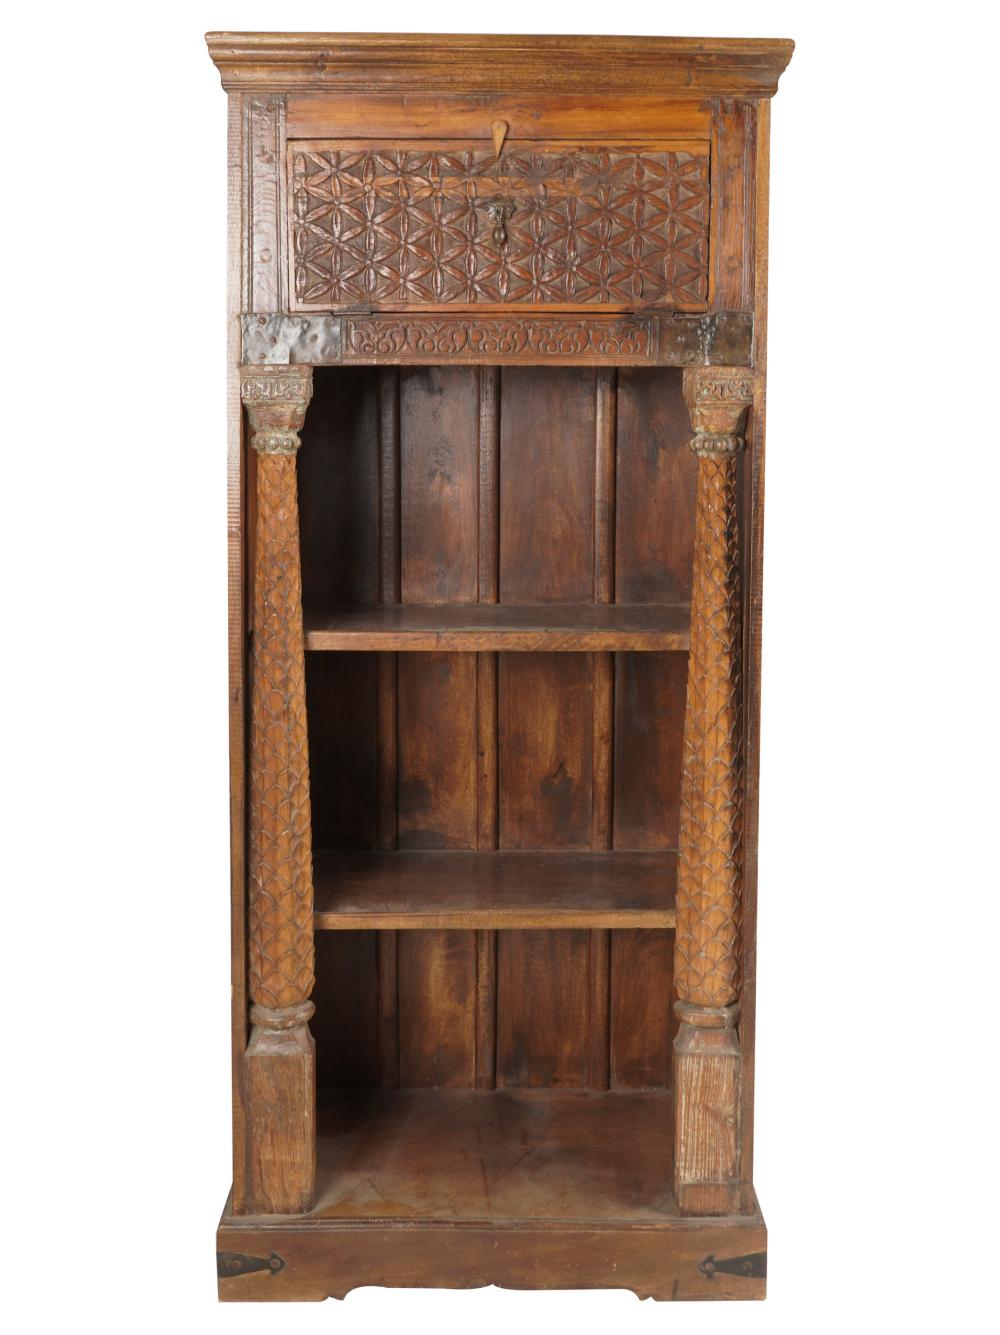 RUSTIC CARVED WOOD CABINETwith a drop